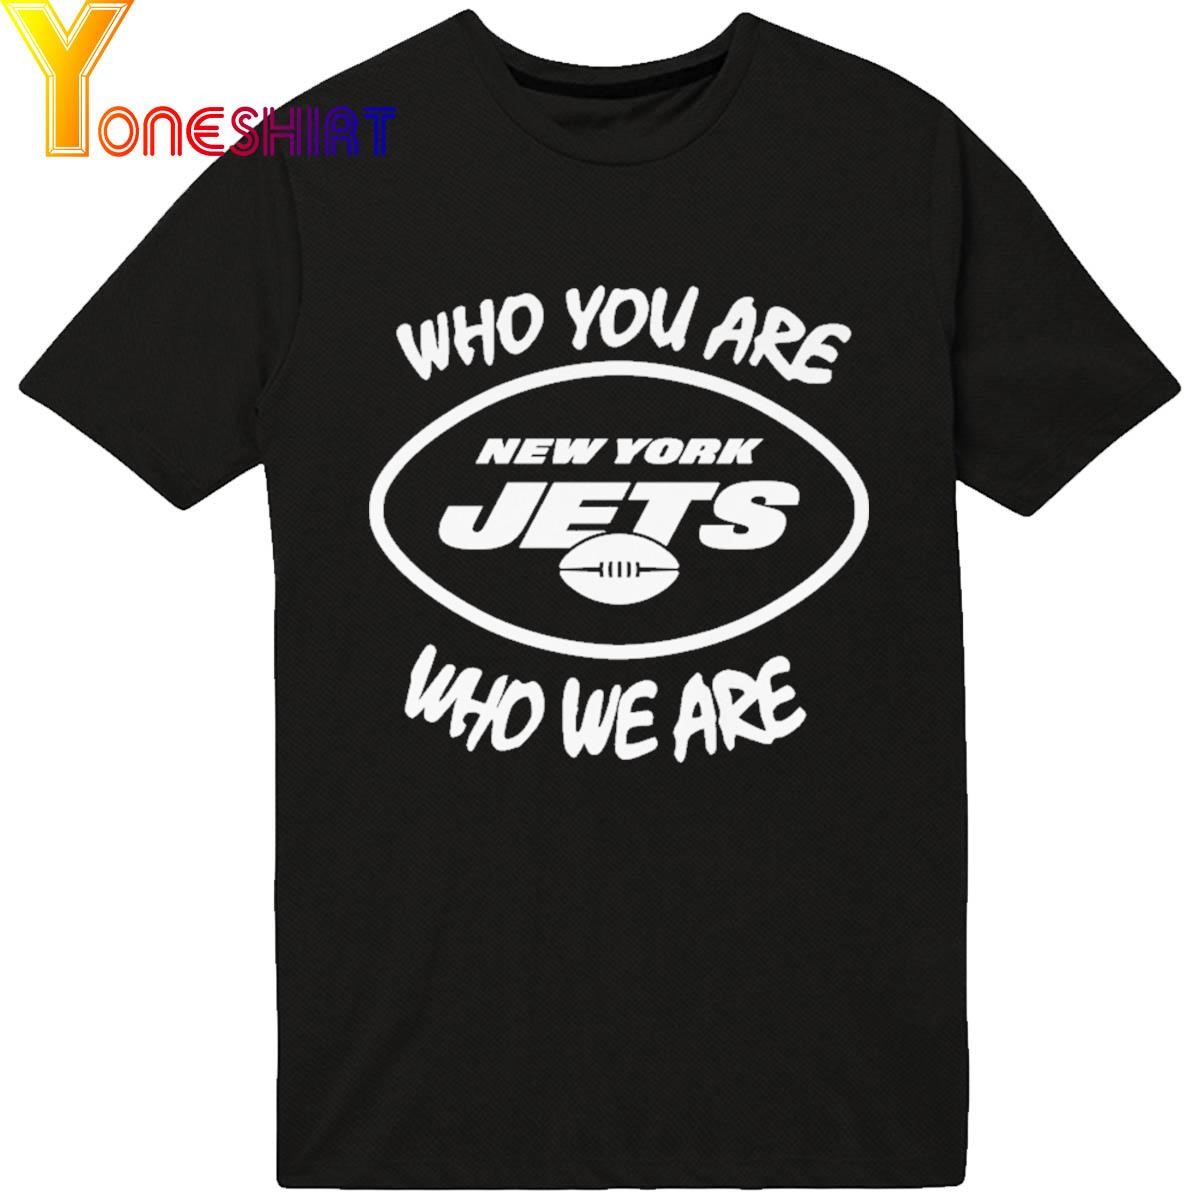 Who You Are New York JETS Who We Are Shirt